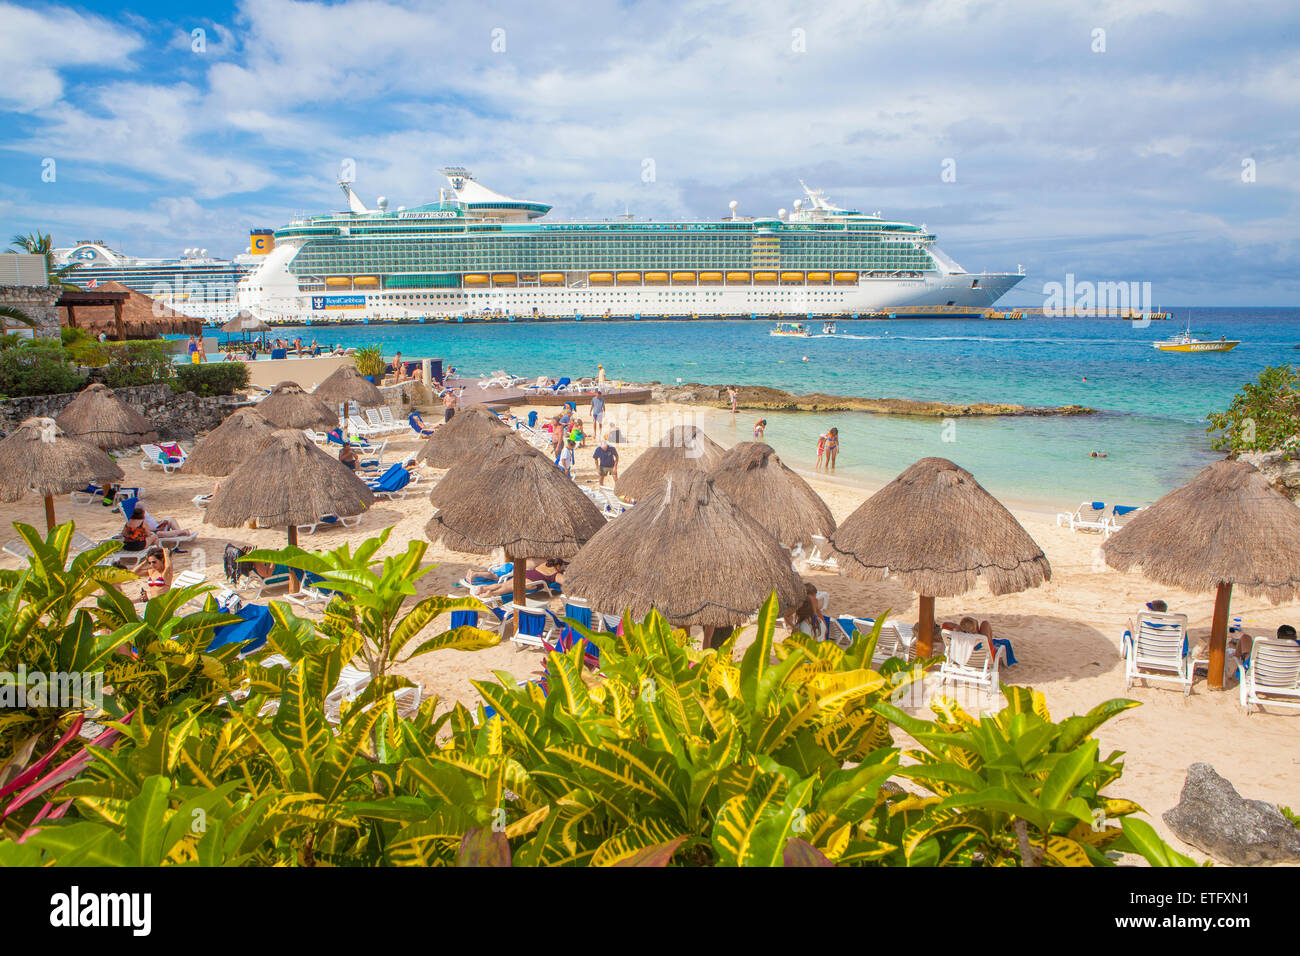 Liberty of the Seas cruise liner docked at Cozumel, Mexico. Tourists swimming and relaxing on the beach under cabanas. Stock Photo